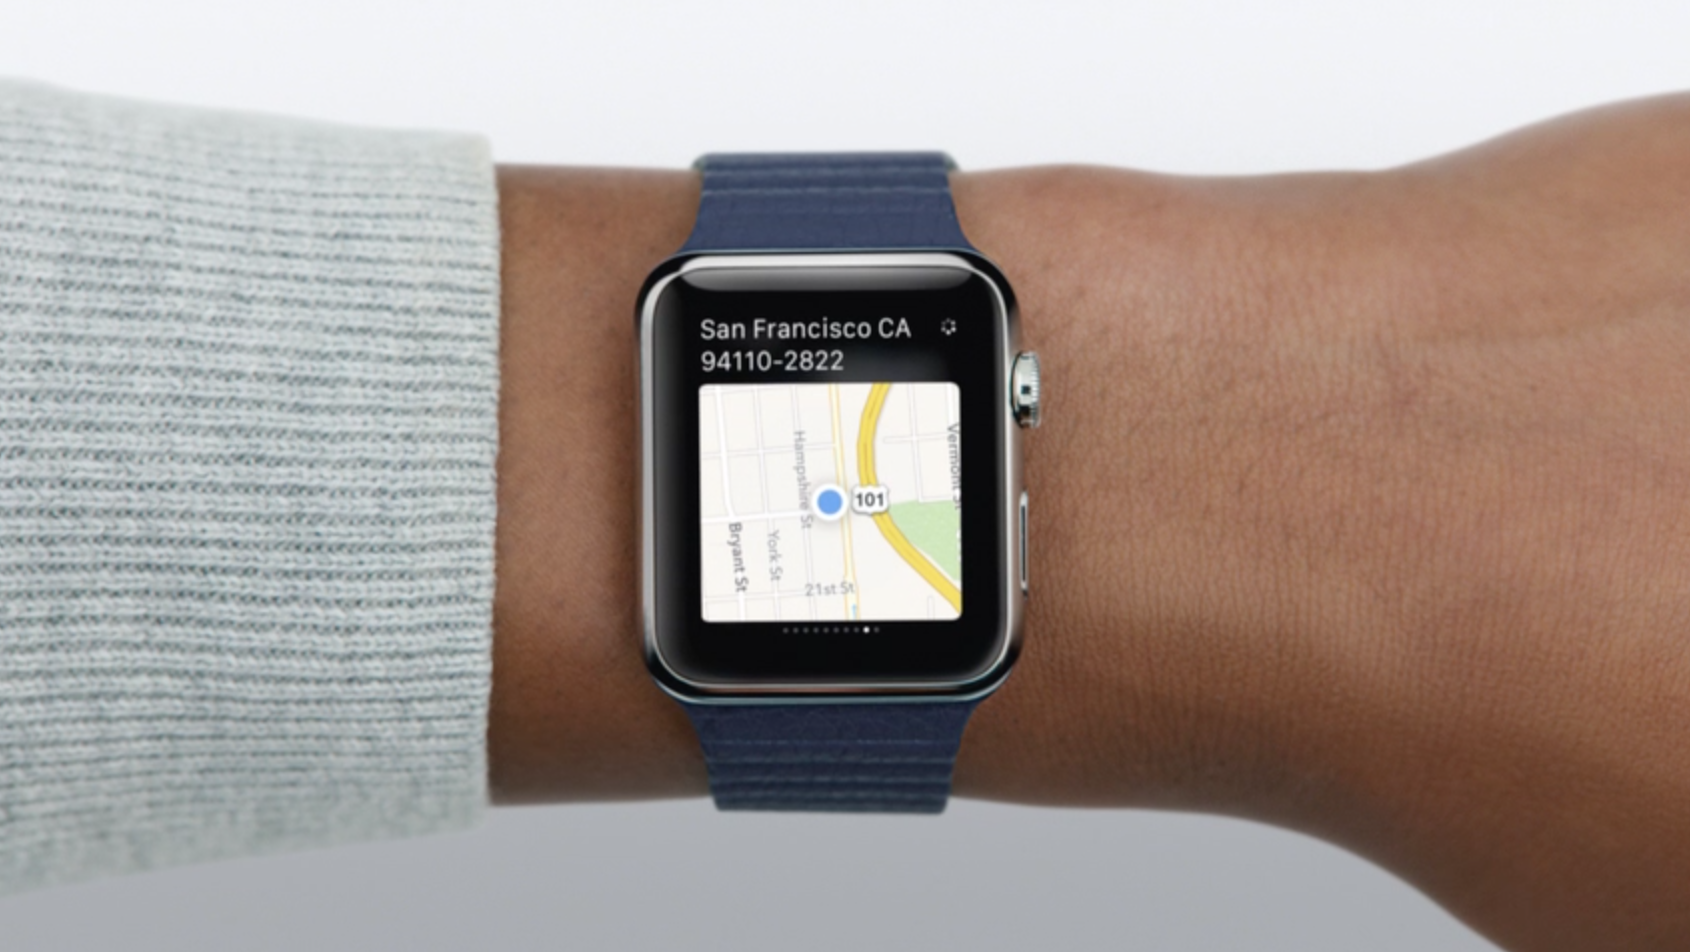 With Maps for Apple Watch, getting directions has never been easier